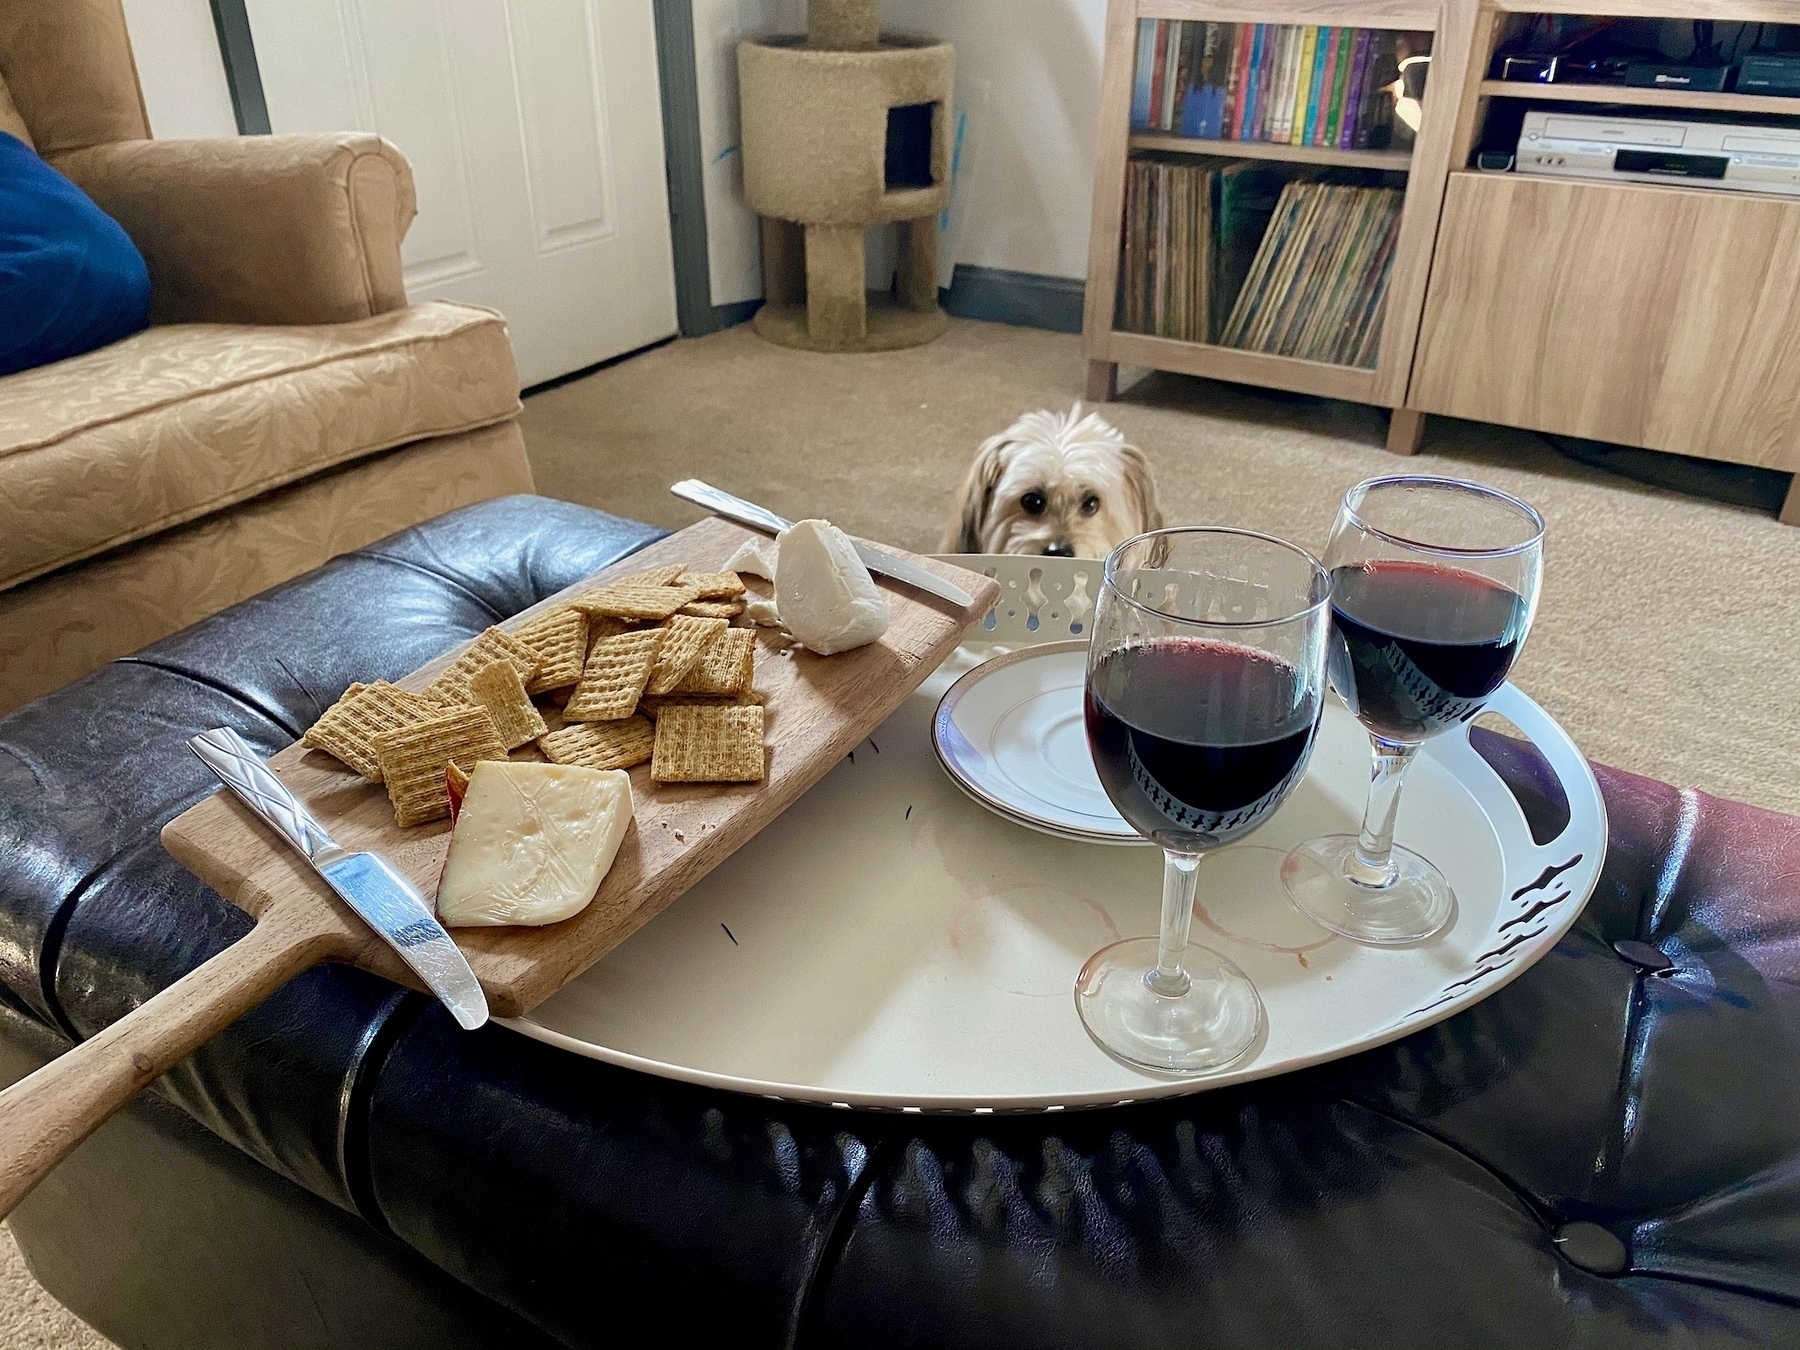 Two stemmed glasses of mulled wine sitting on a tray, next to plates and a cutting board with cheese, crackers, and knives. The tray is on top of a black ottoman, with the head of a white dog staring at the tray in the background.